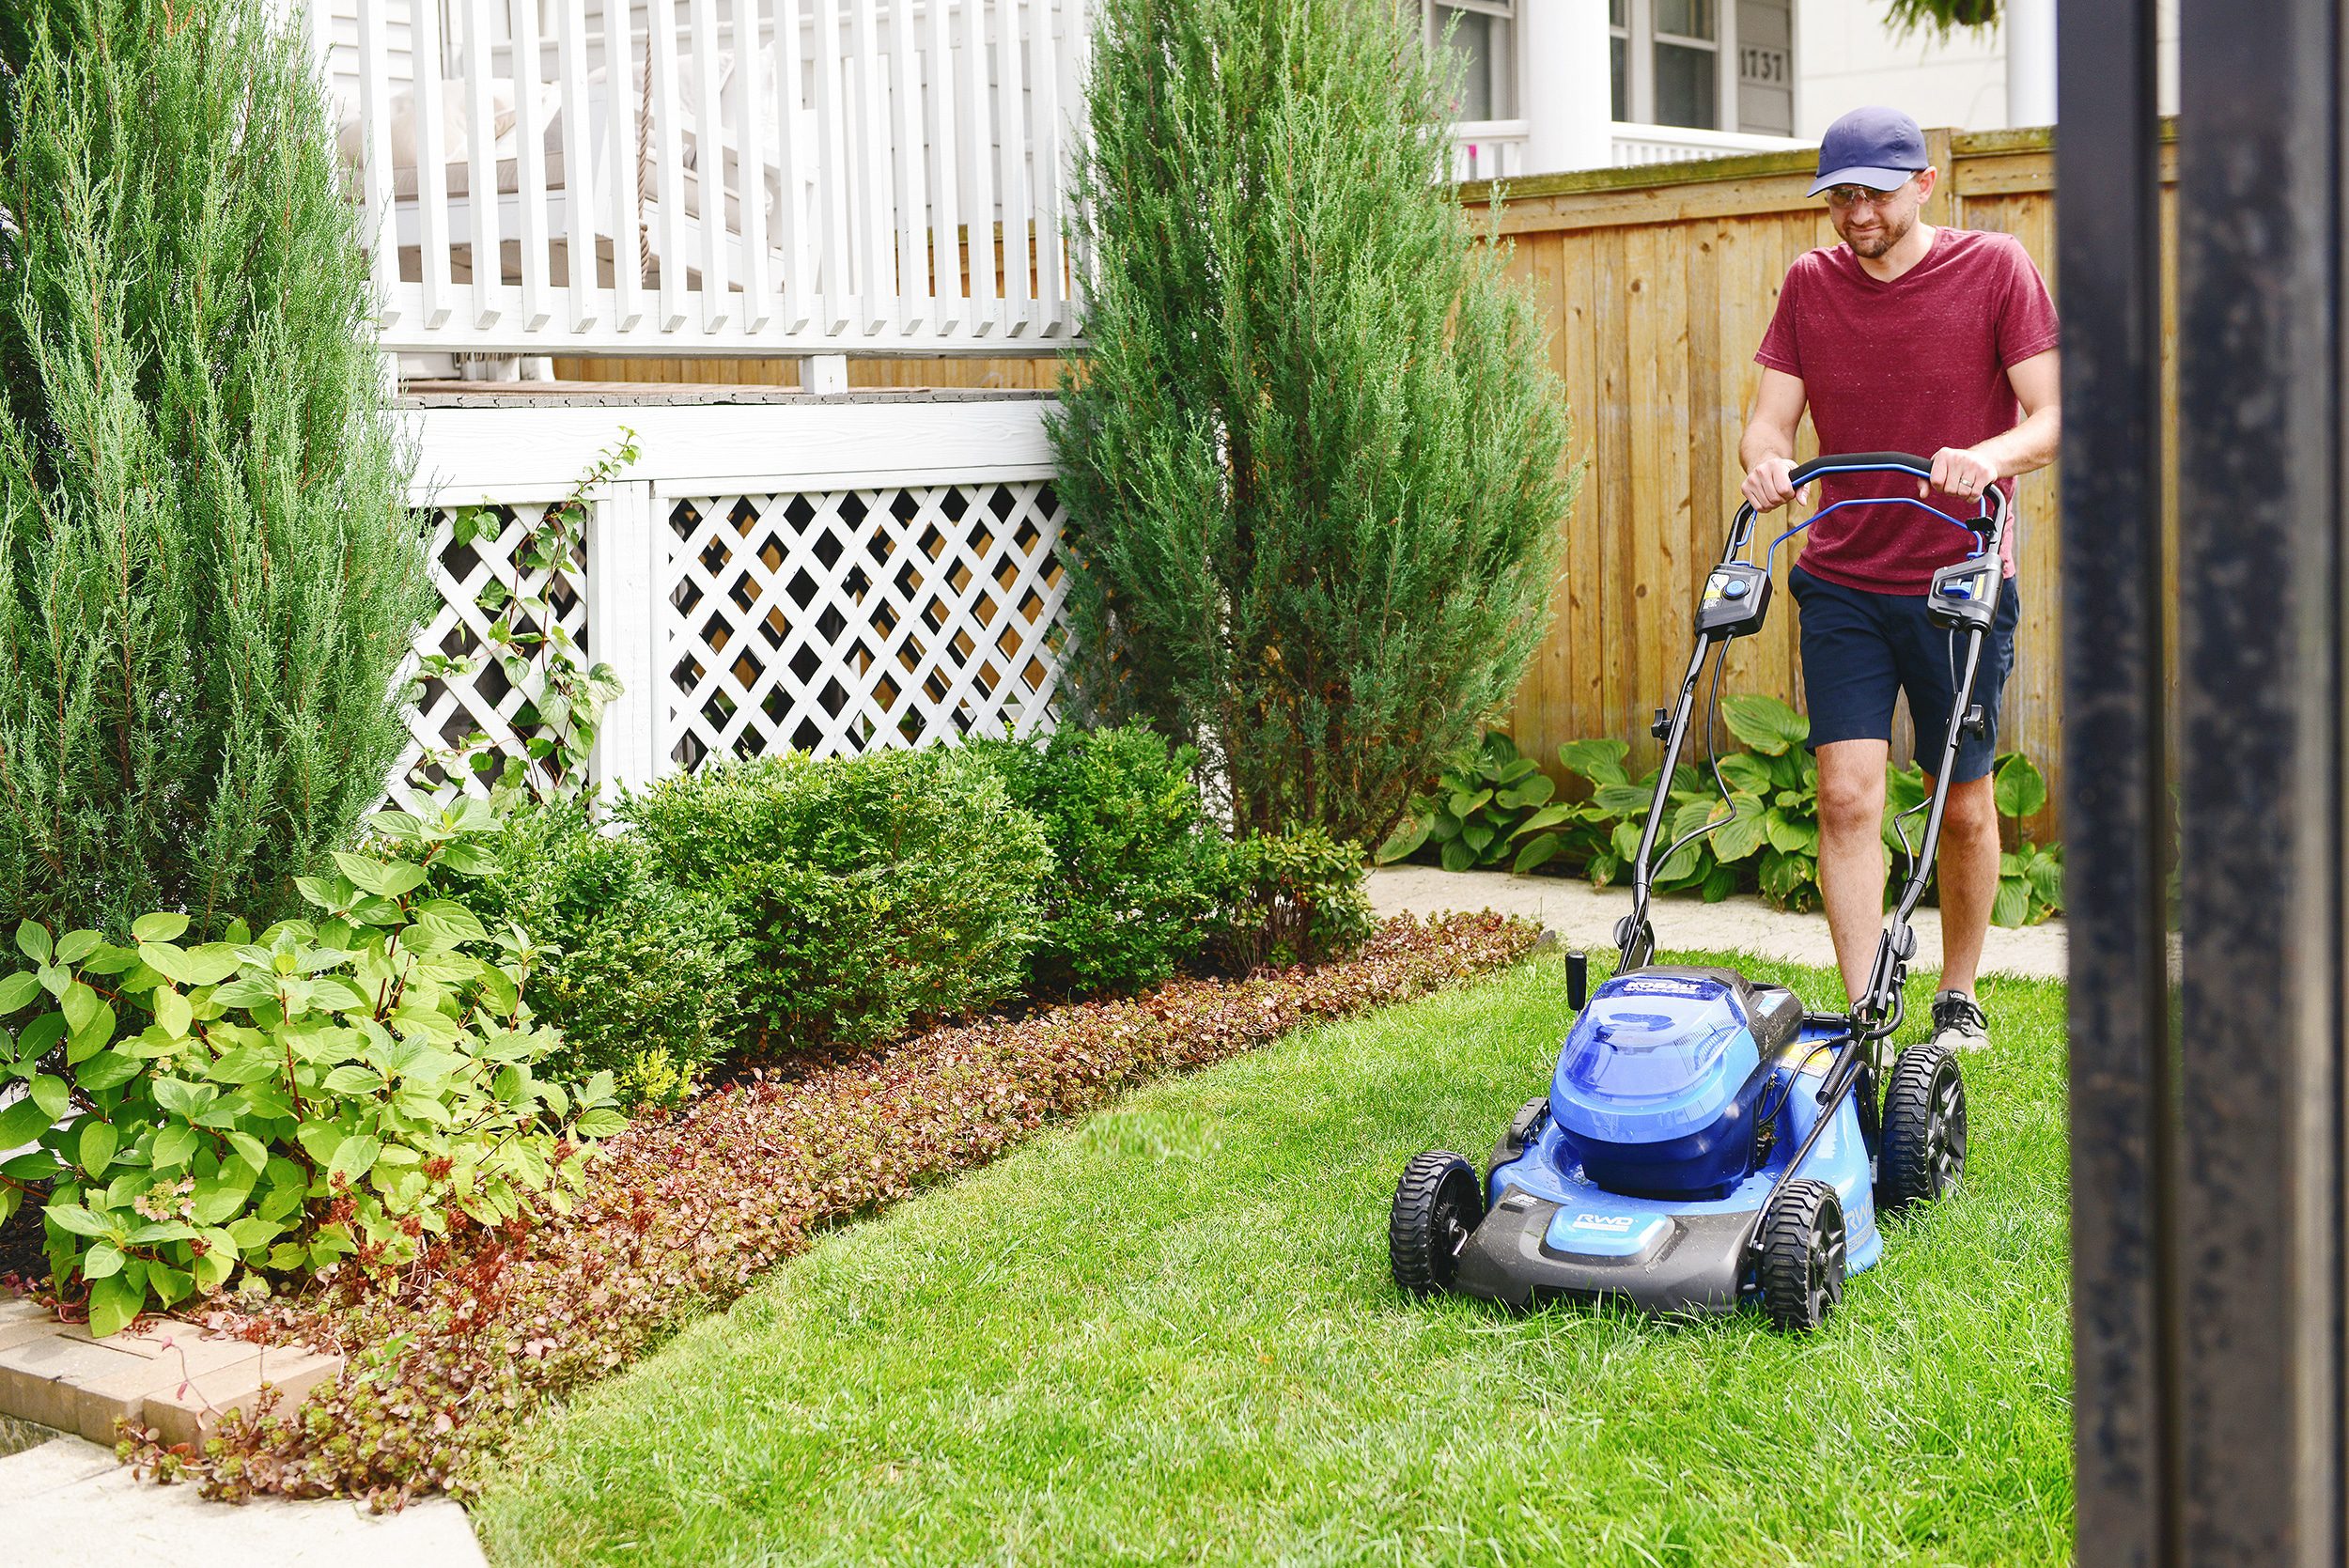 Going Green for Fall Yard Cleanup, using battery powered lawn tools to reduce environmental impact | via Yellow Brick Home